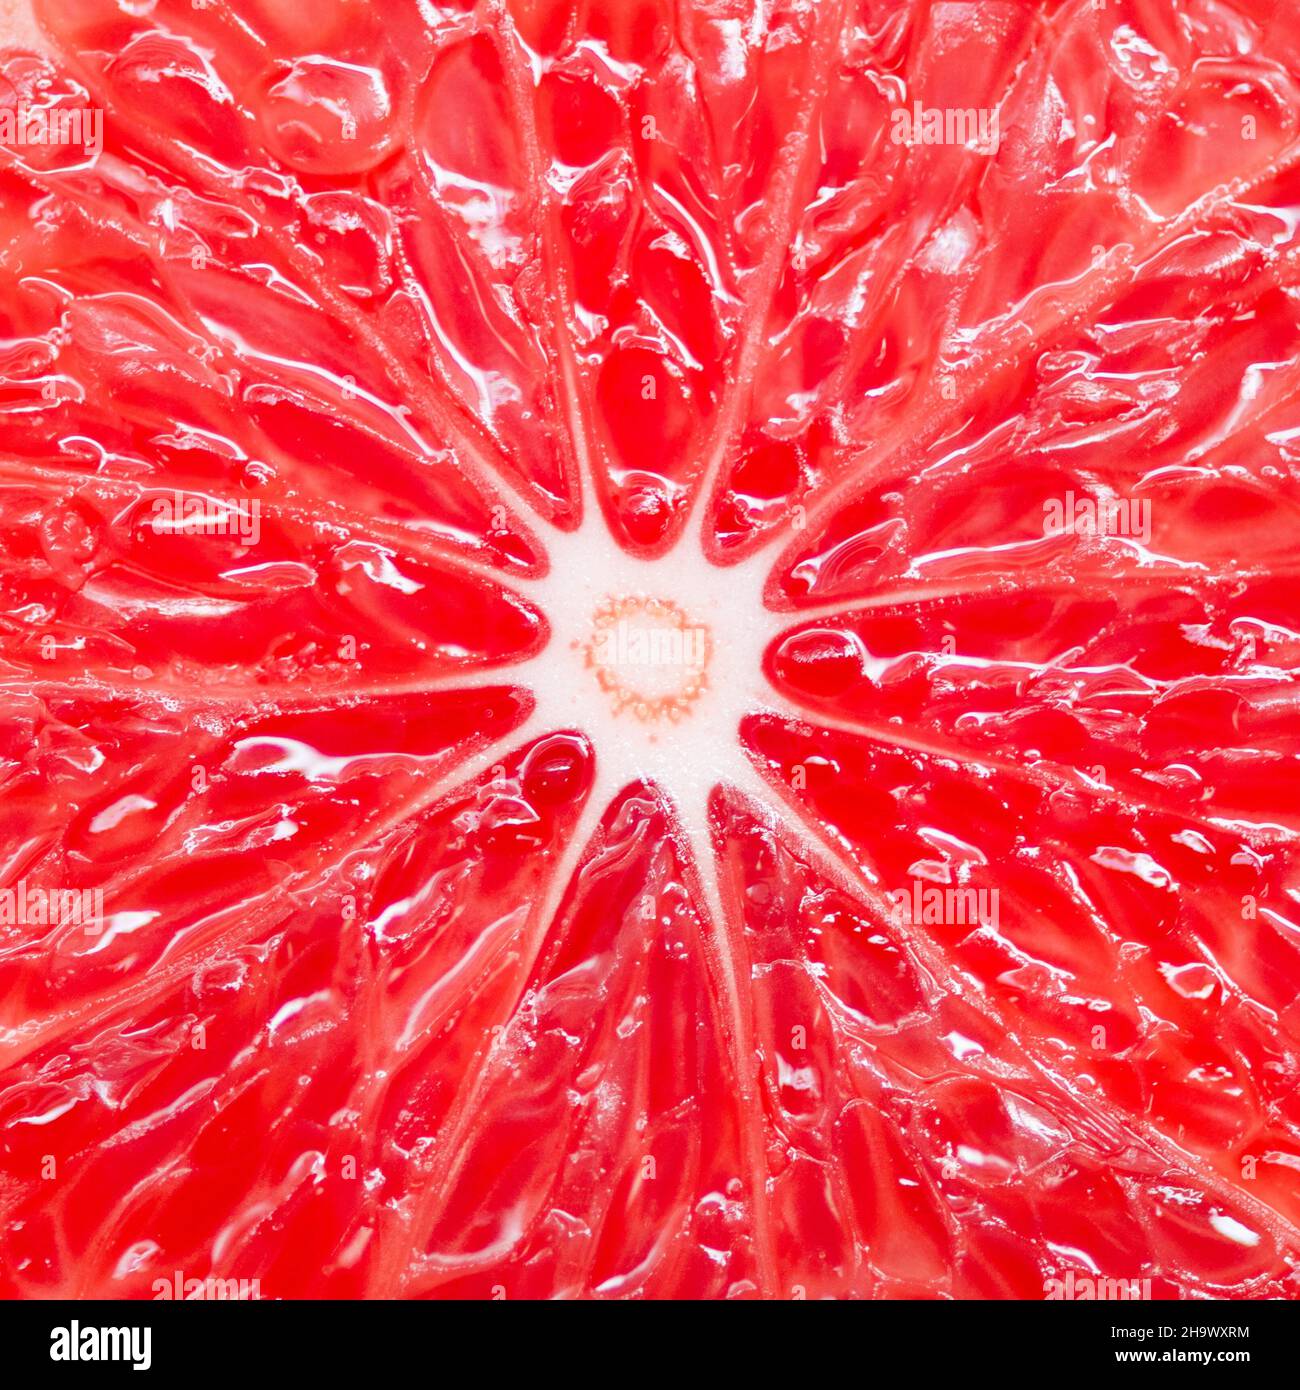 Close-up centered view of red grapefruit. Macro photography. Stock Photo